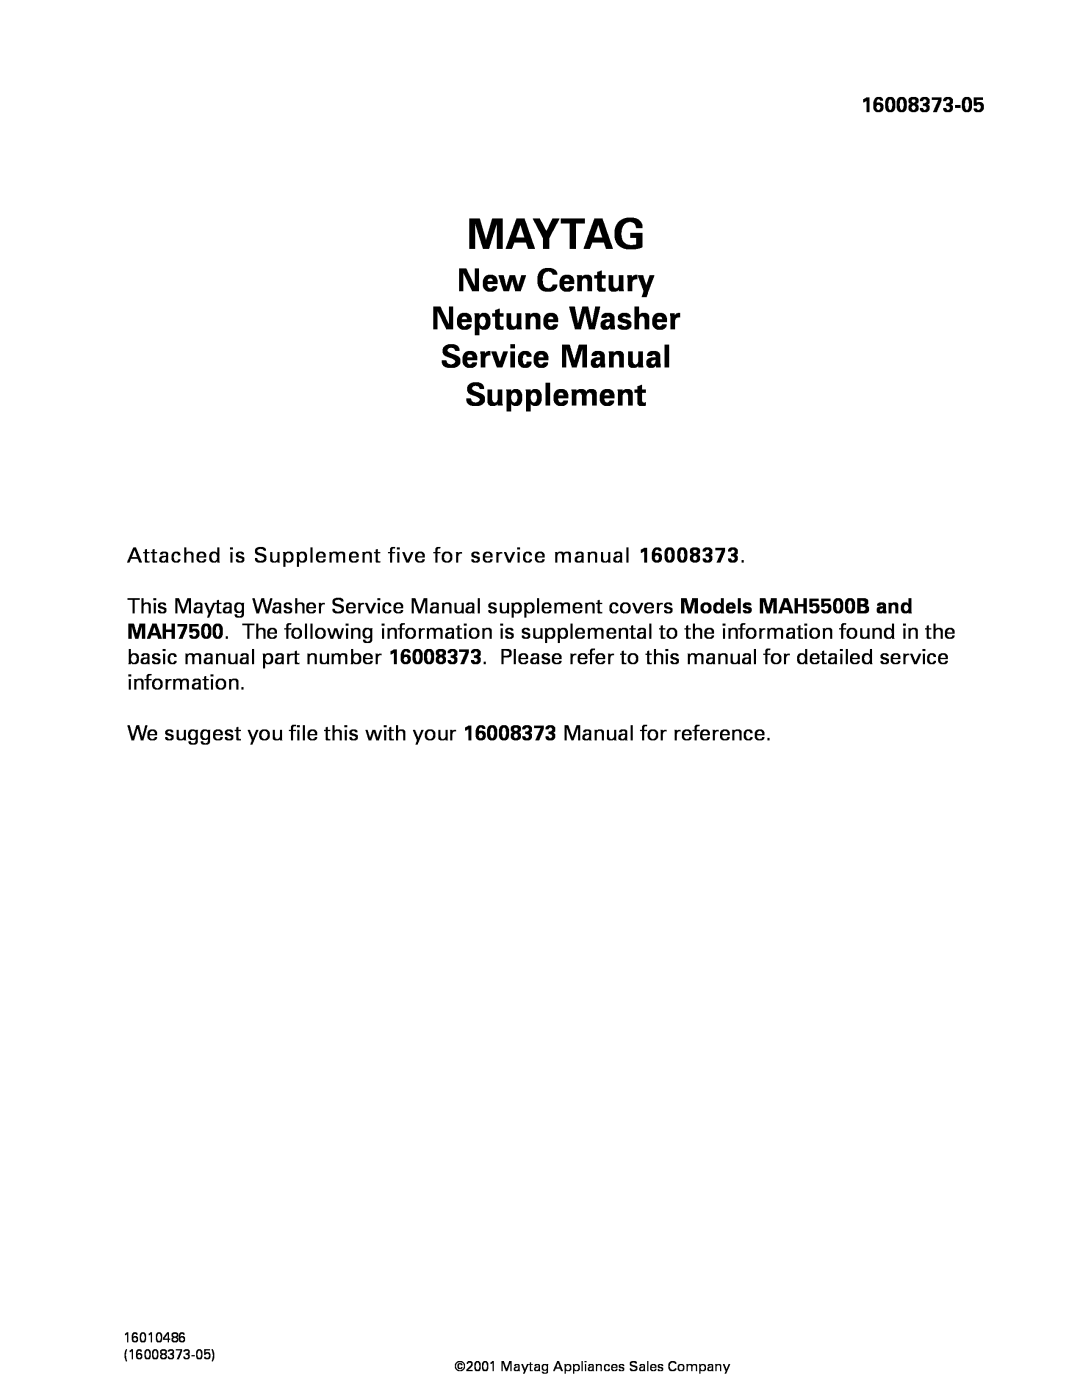 Whirlpool MAH3000 service manual New Century Neptune Washer Service Manual Supplement, 16008373-05, Maytag 